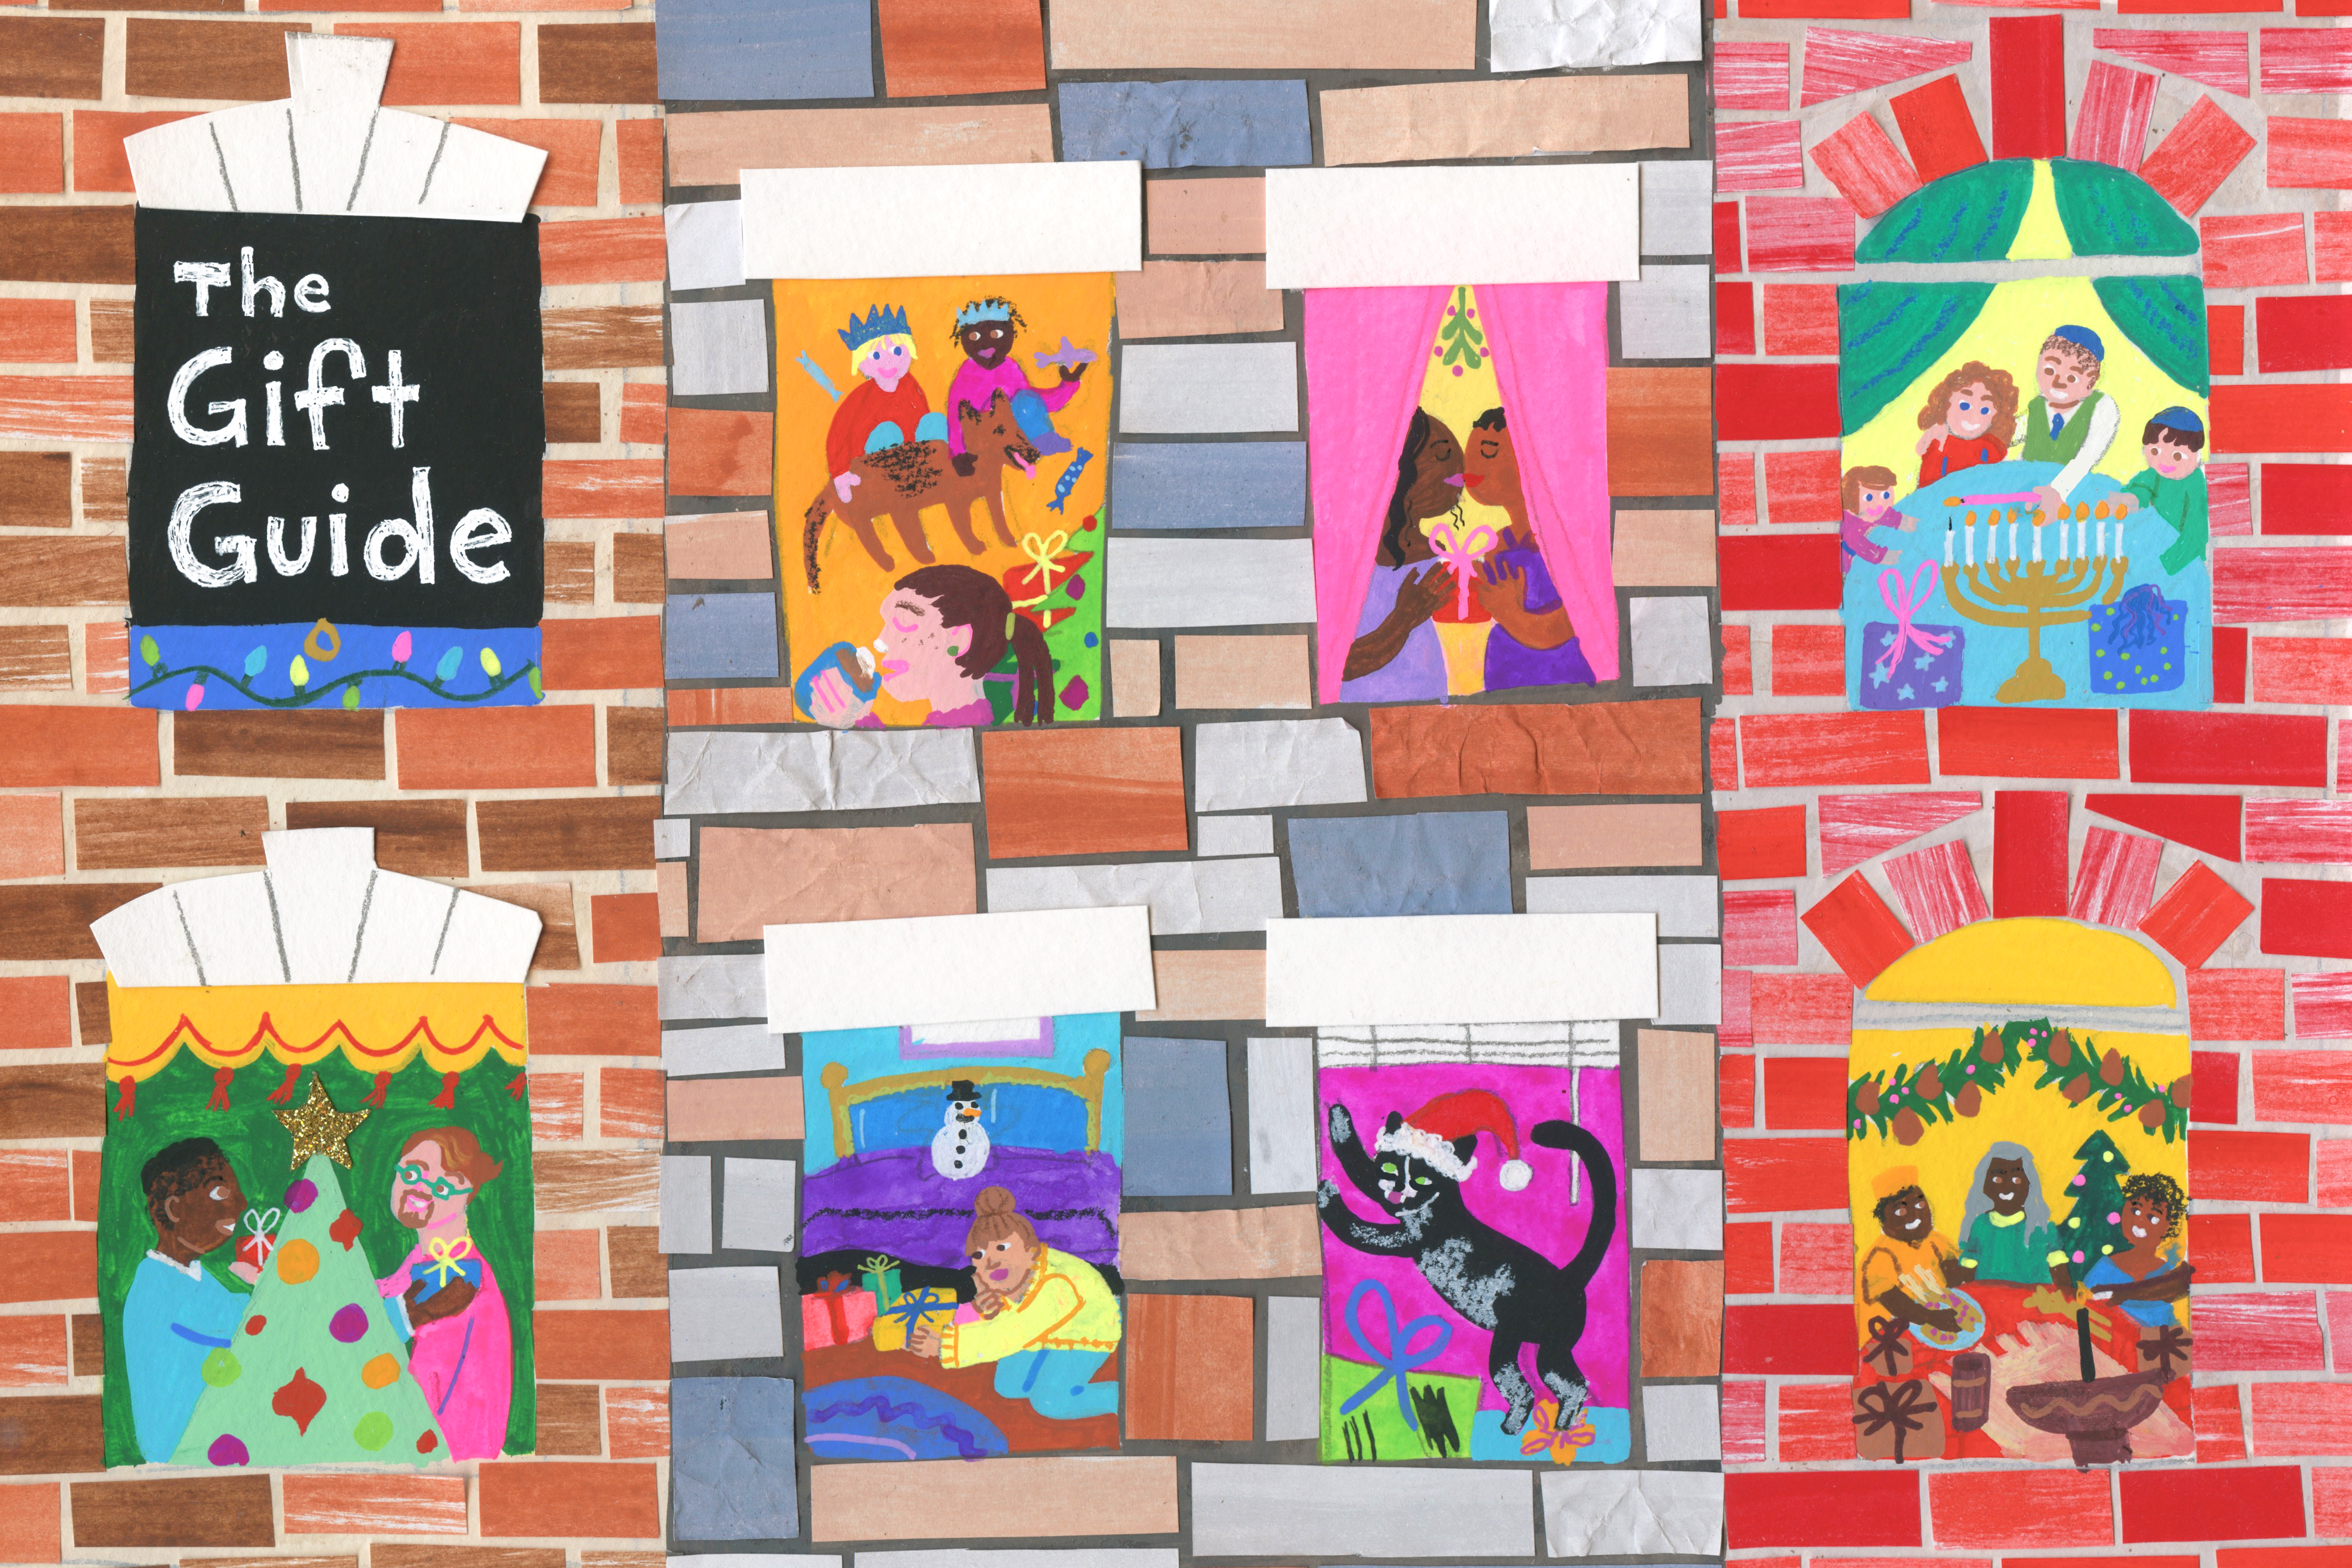 The Baltimore Banner gift guide illustration. A hand-drawn illustration of colorful brick building walls, with seven windows through which you can see families having various holiday experiences.